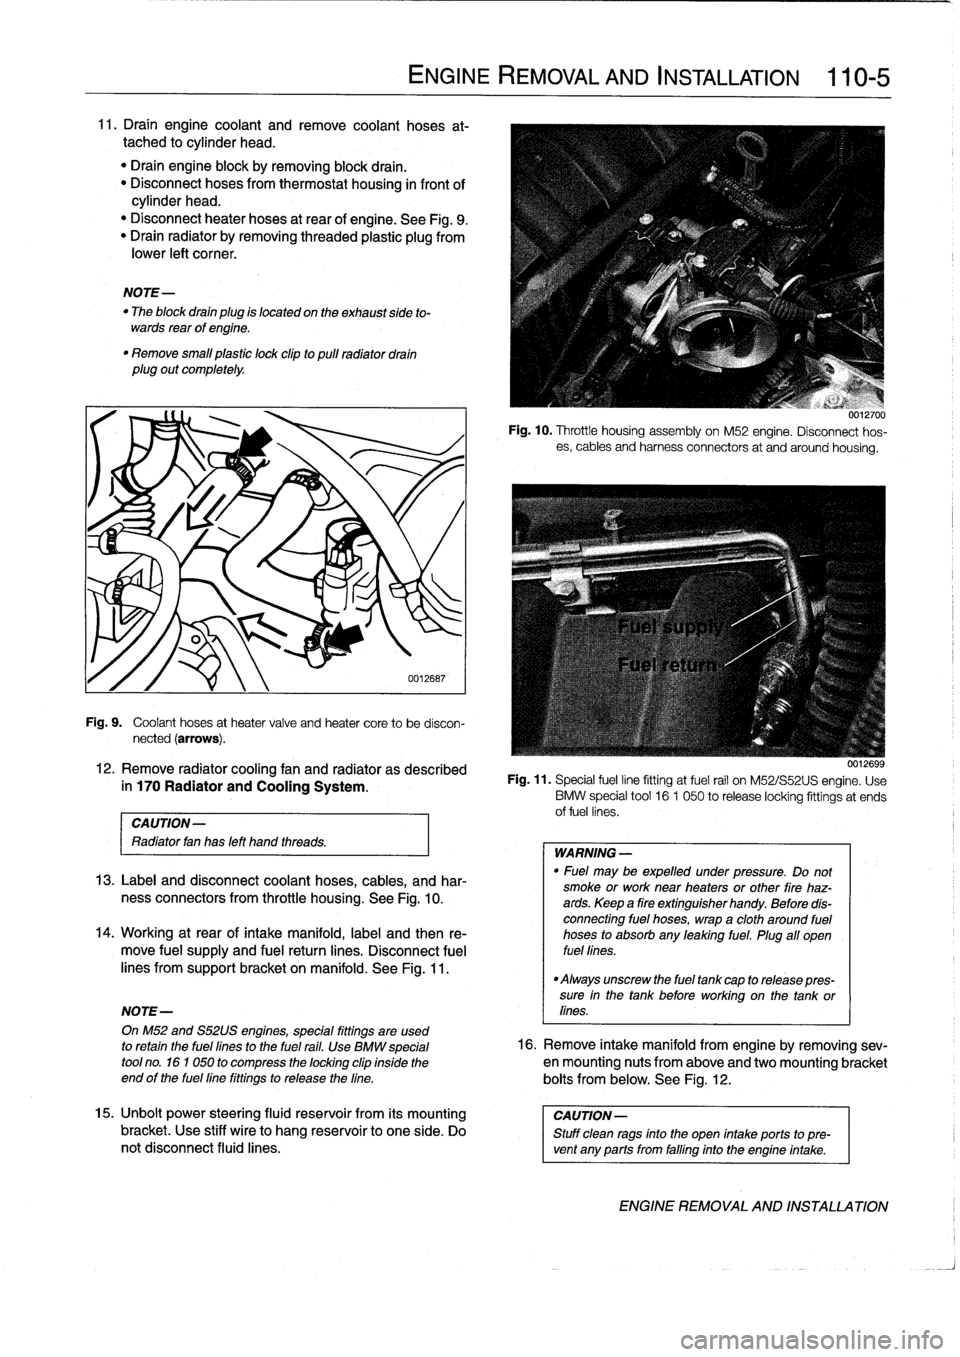 BMW 328i 1998 E36 Workshop Manual 
11
.
Draín
engine
coolant
and
Rmove
coolant
hoses
at-
tached
to
cylinder
head
.

"
Drain
engine
block
byremoving
block
drain
.
"
Disconnect
hoses
from
thermostat
housing
in
front
of
cylinder
head
.
